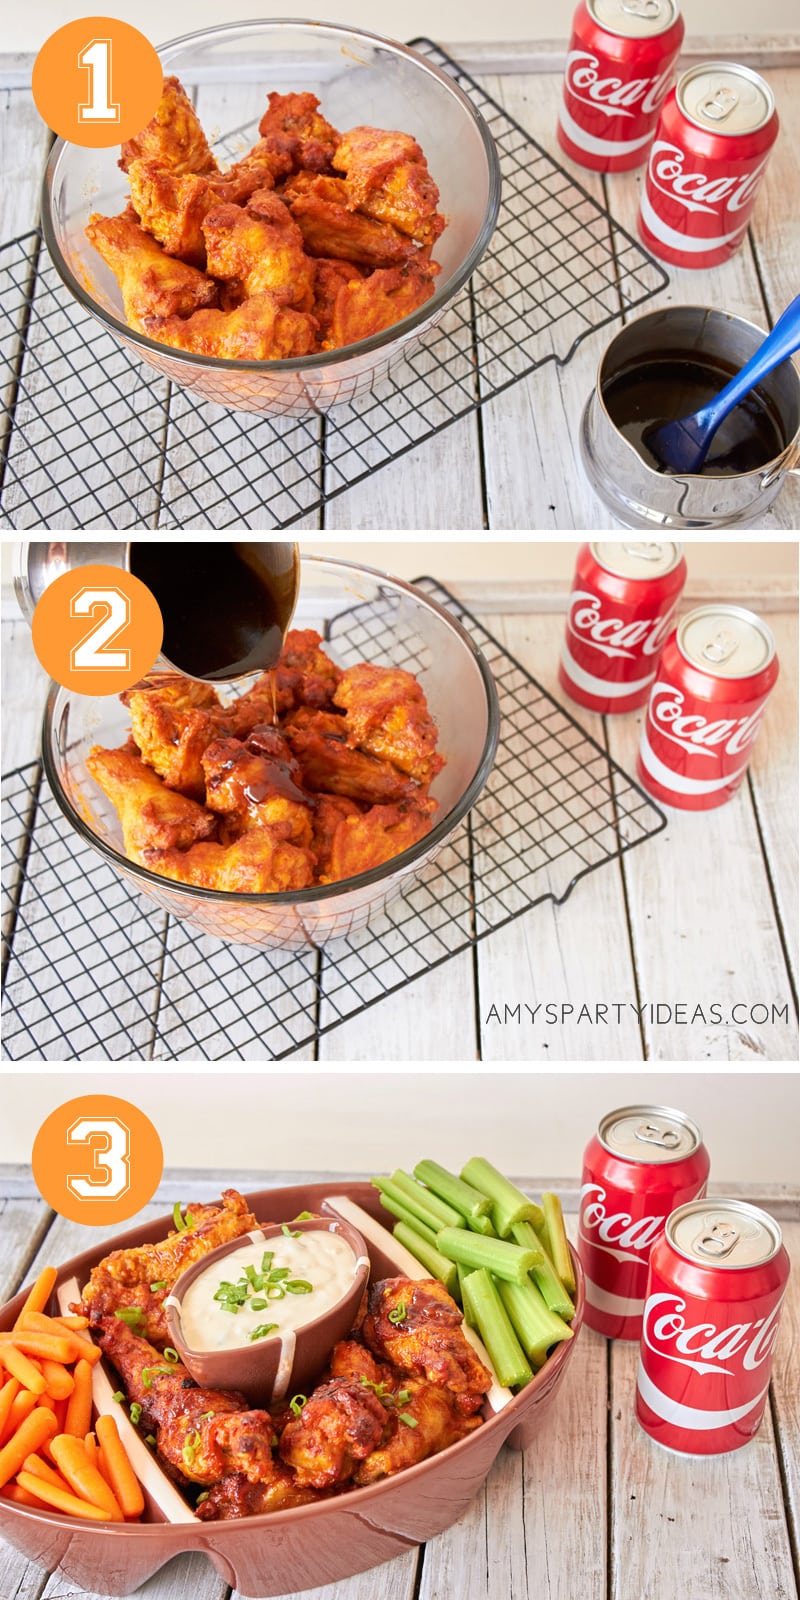 Sweet Heat Coca-Cola Buffalo Chicken Wings Appetizers for tailgating | Coca-Cola-Fall-Football-Sams-Club-Tailgate #shop #ShareYourSpirit #CollectiveBias #ad